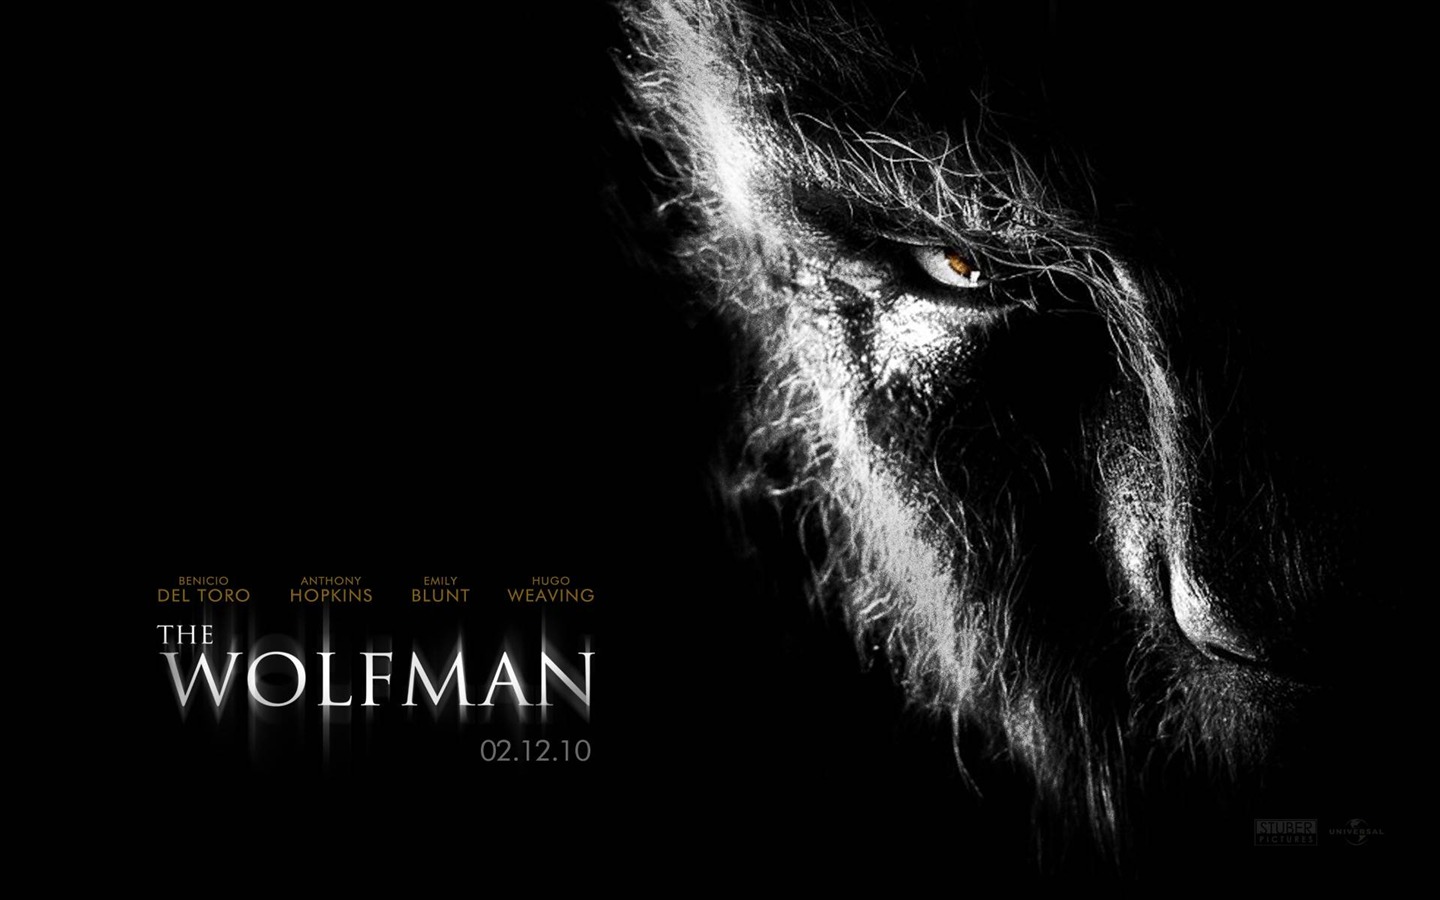 The Wolfman Movie Wallpapers #9 - 1440x900